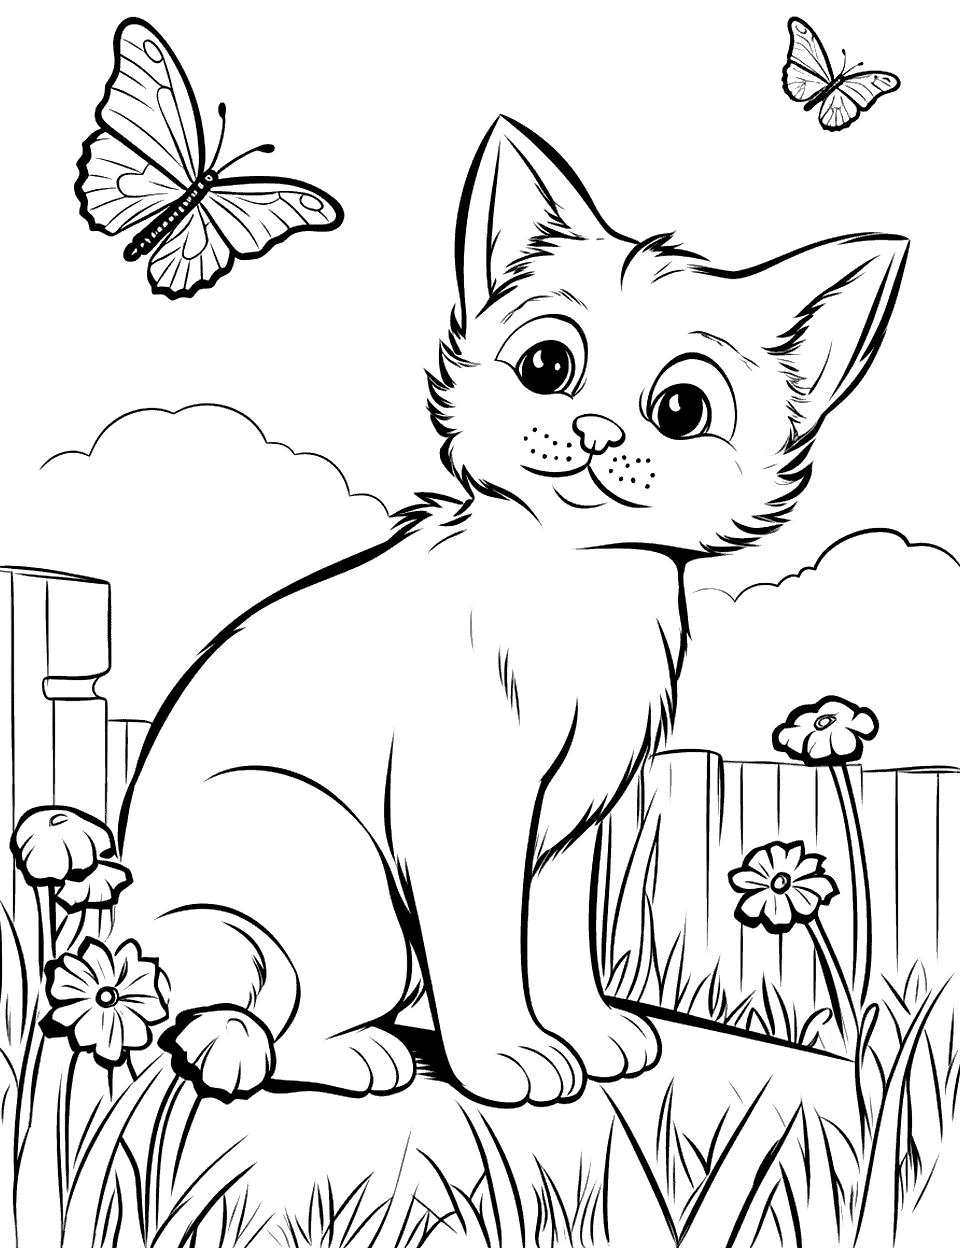 Farm Cat Watching Butterflies Coloring Page - A beautiful cat watching butterflies in the farmyard.